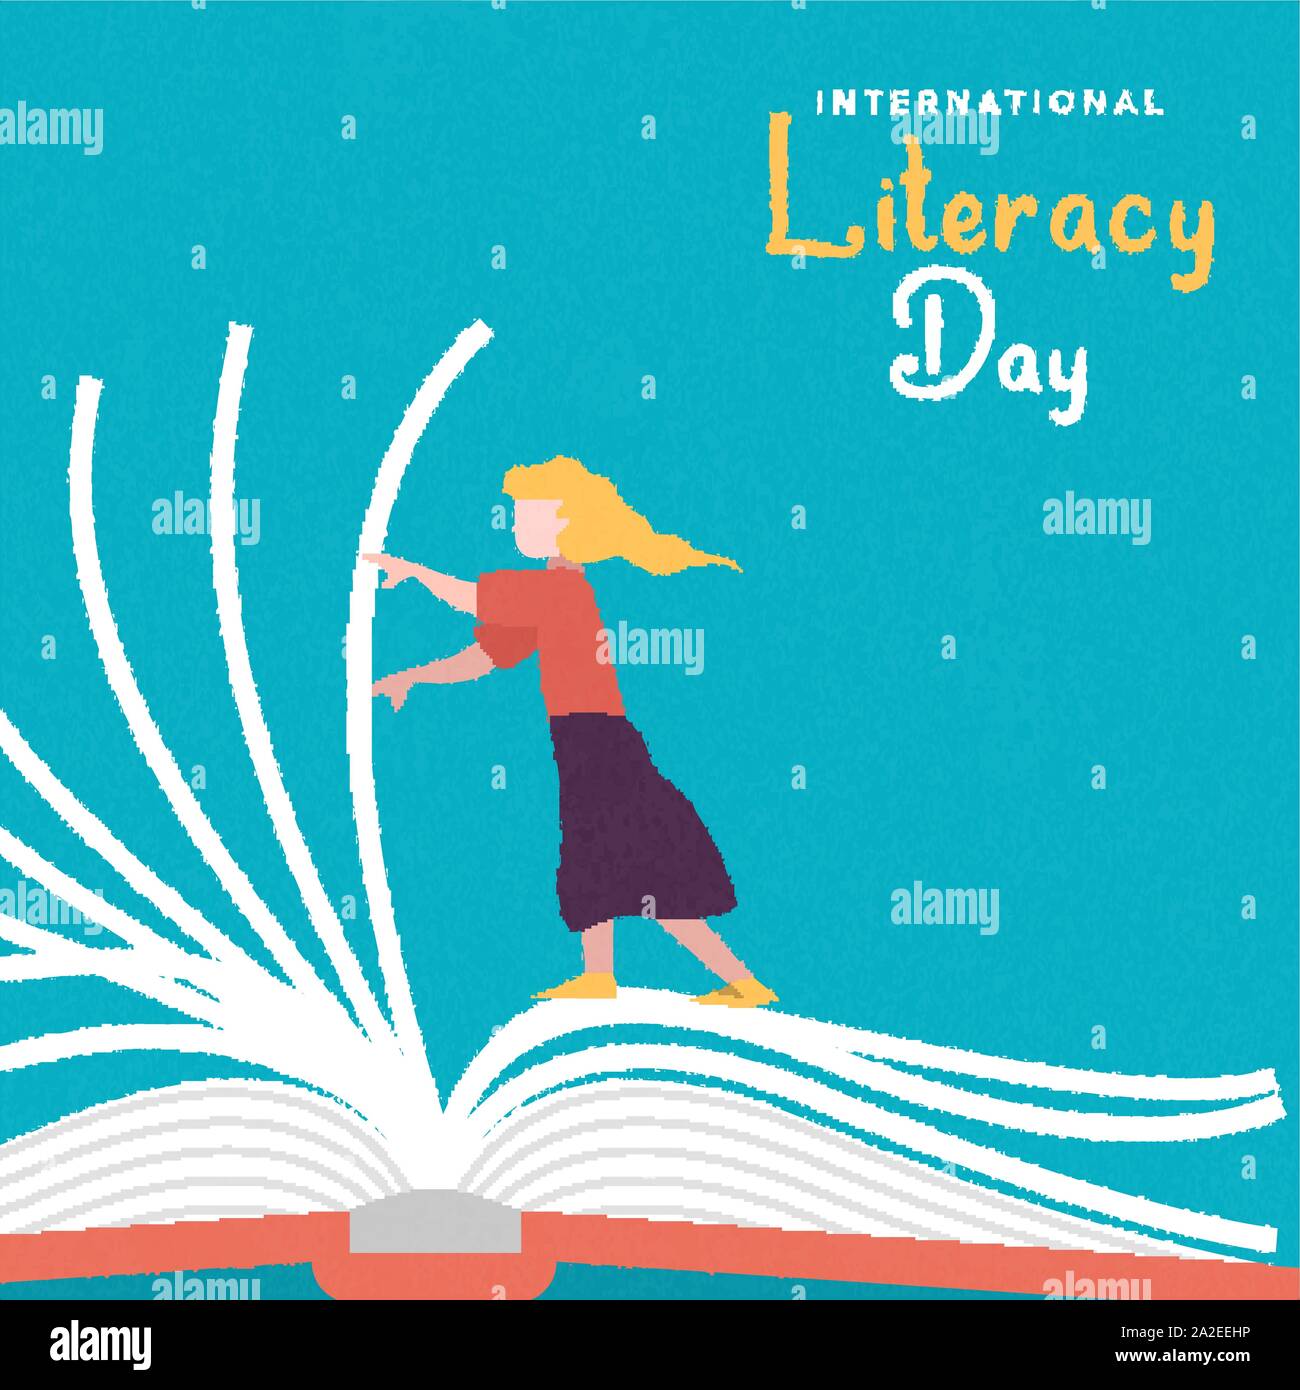 International Literacy Day illustration of girl turning book pages. Children knowledge concept for education and learning event. Stock Vector